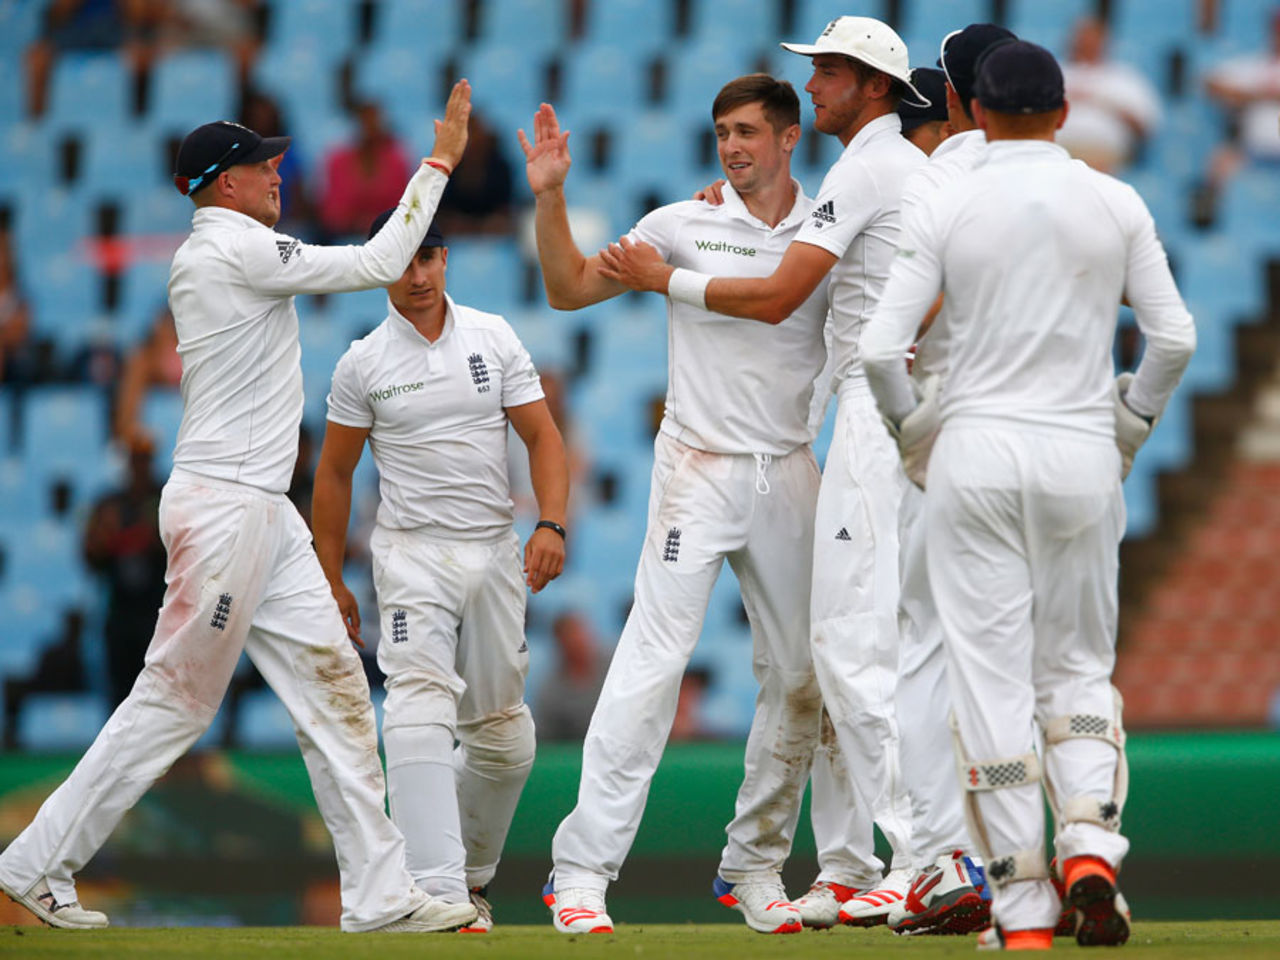 Chris Woakes picked up a wicket in his 14th over, South Africa v England, 4th Test, Centurion, 1st day, January 22, 2016